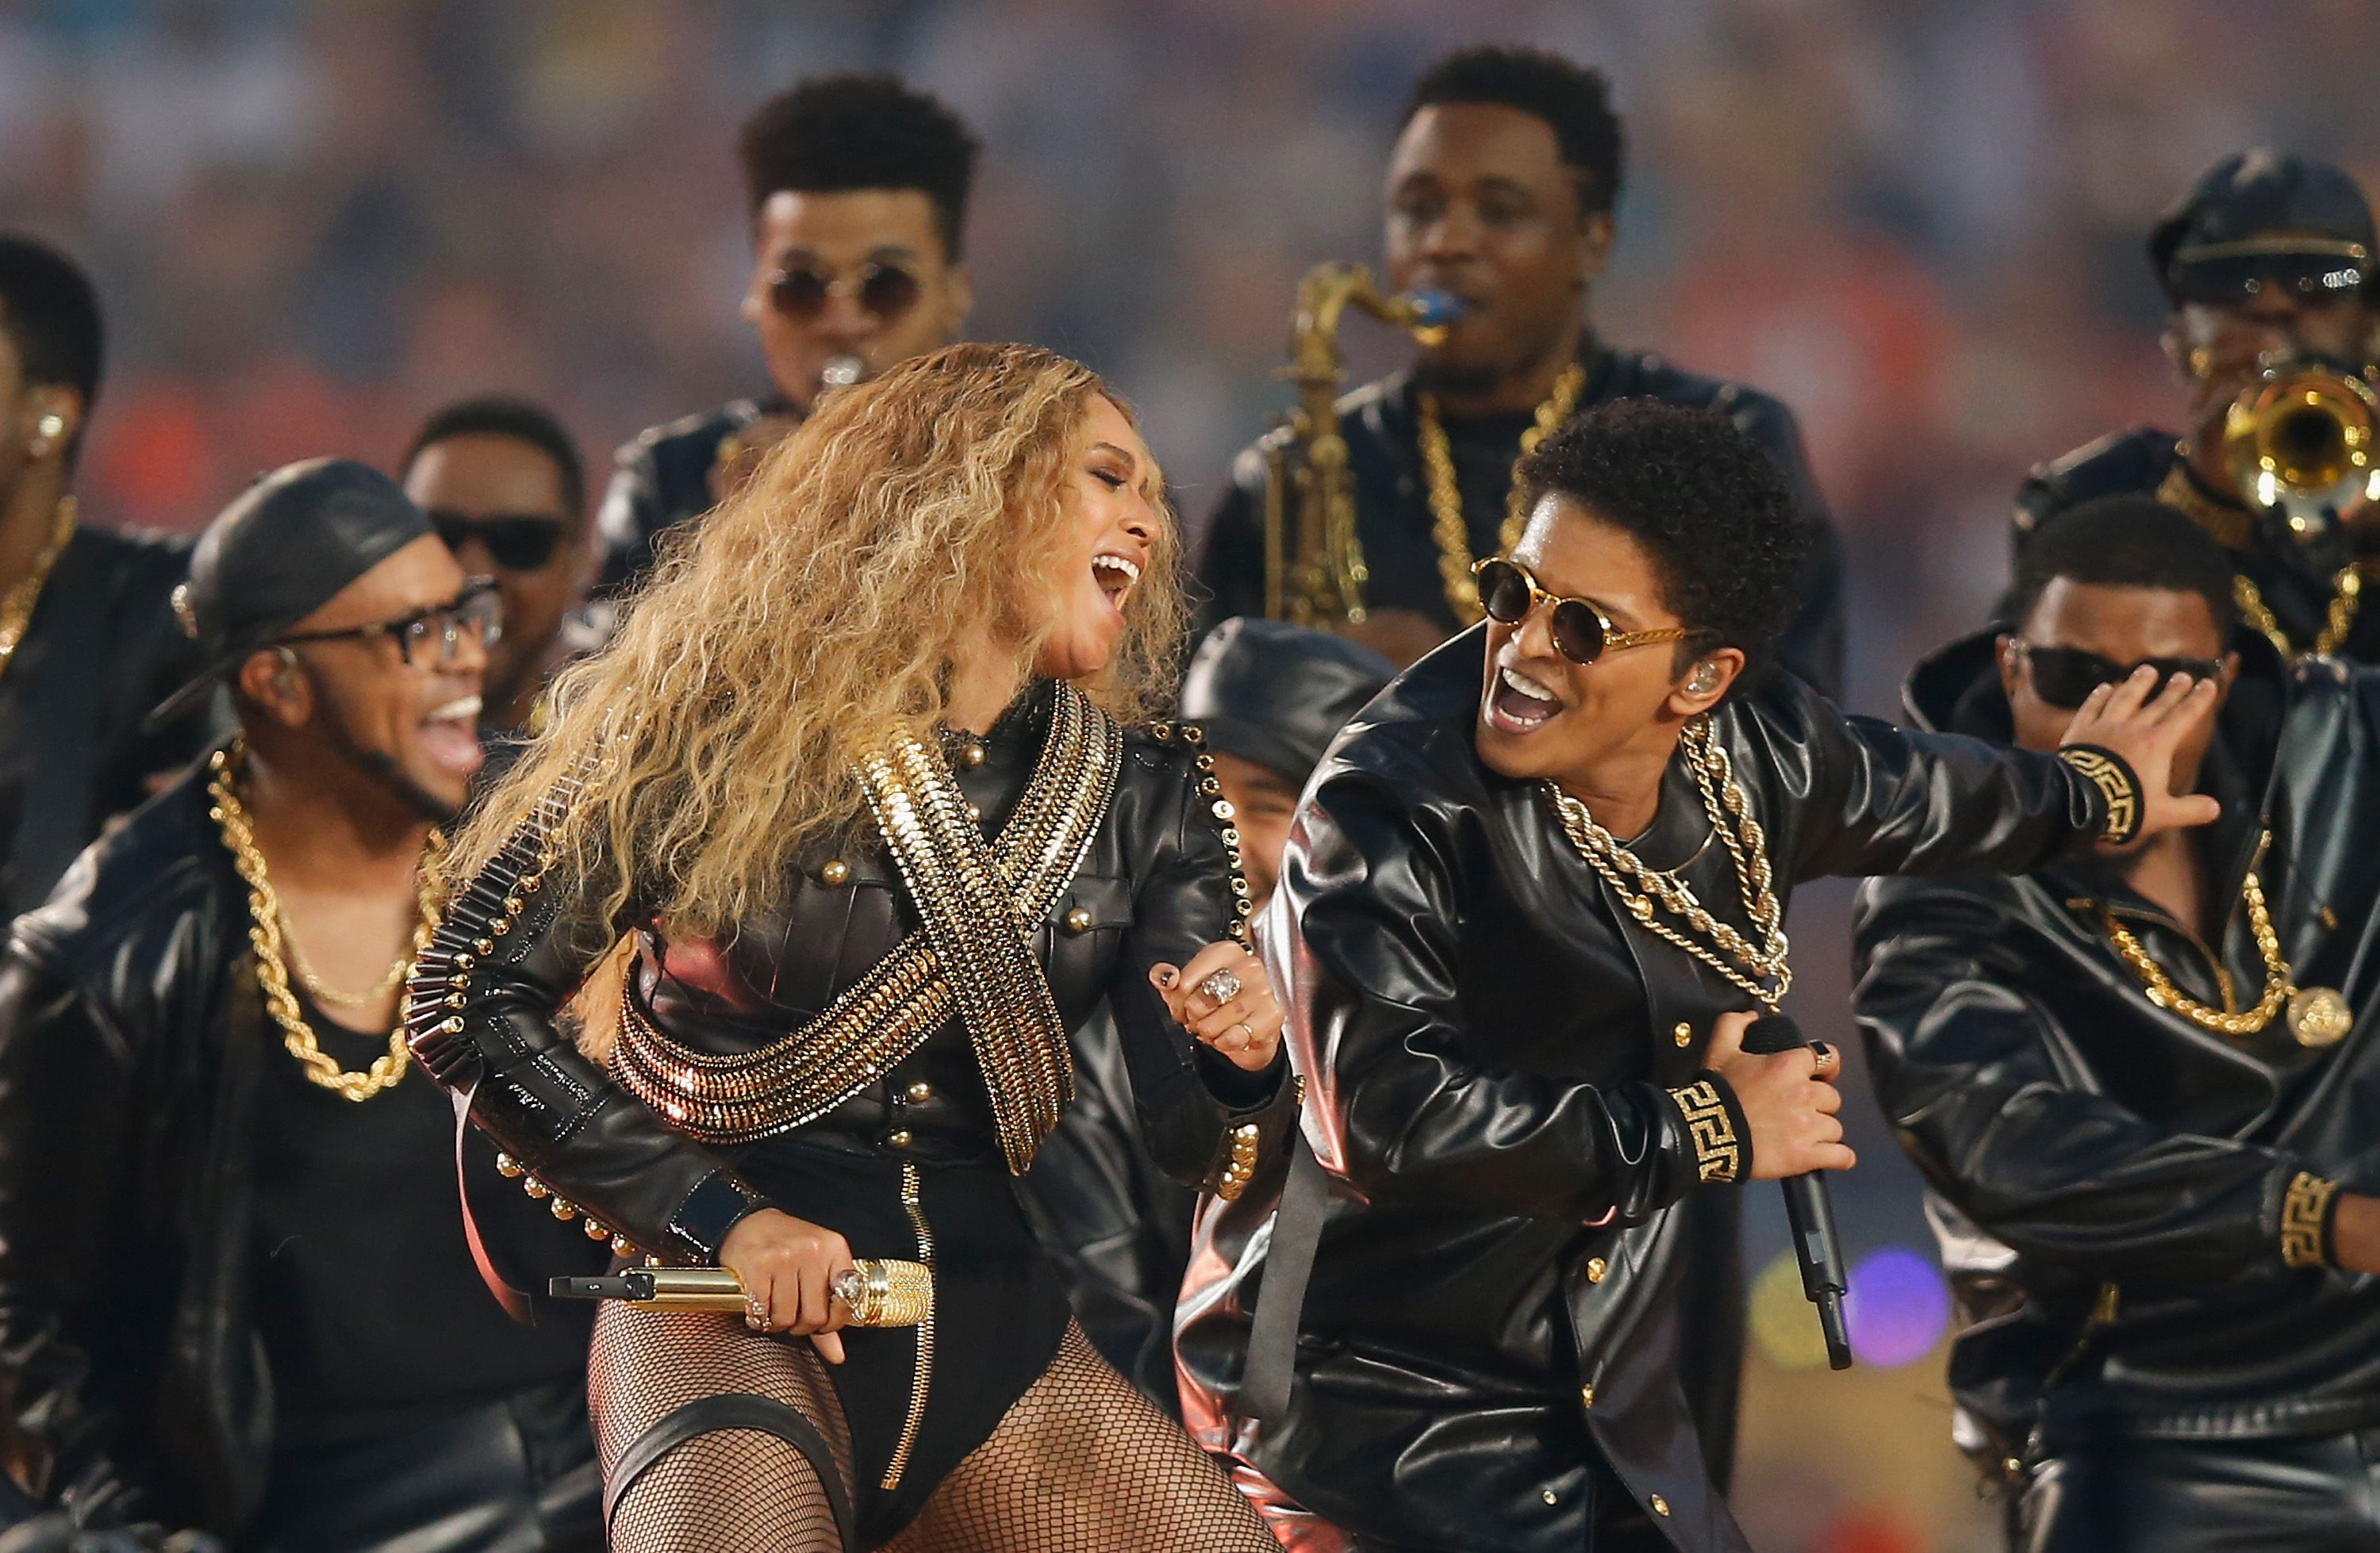 Beyonce at the Pepsi Super Bowl 50 Halftime Show in February 2016 in Santa Clara, California | Source: Getty Images